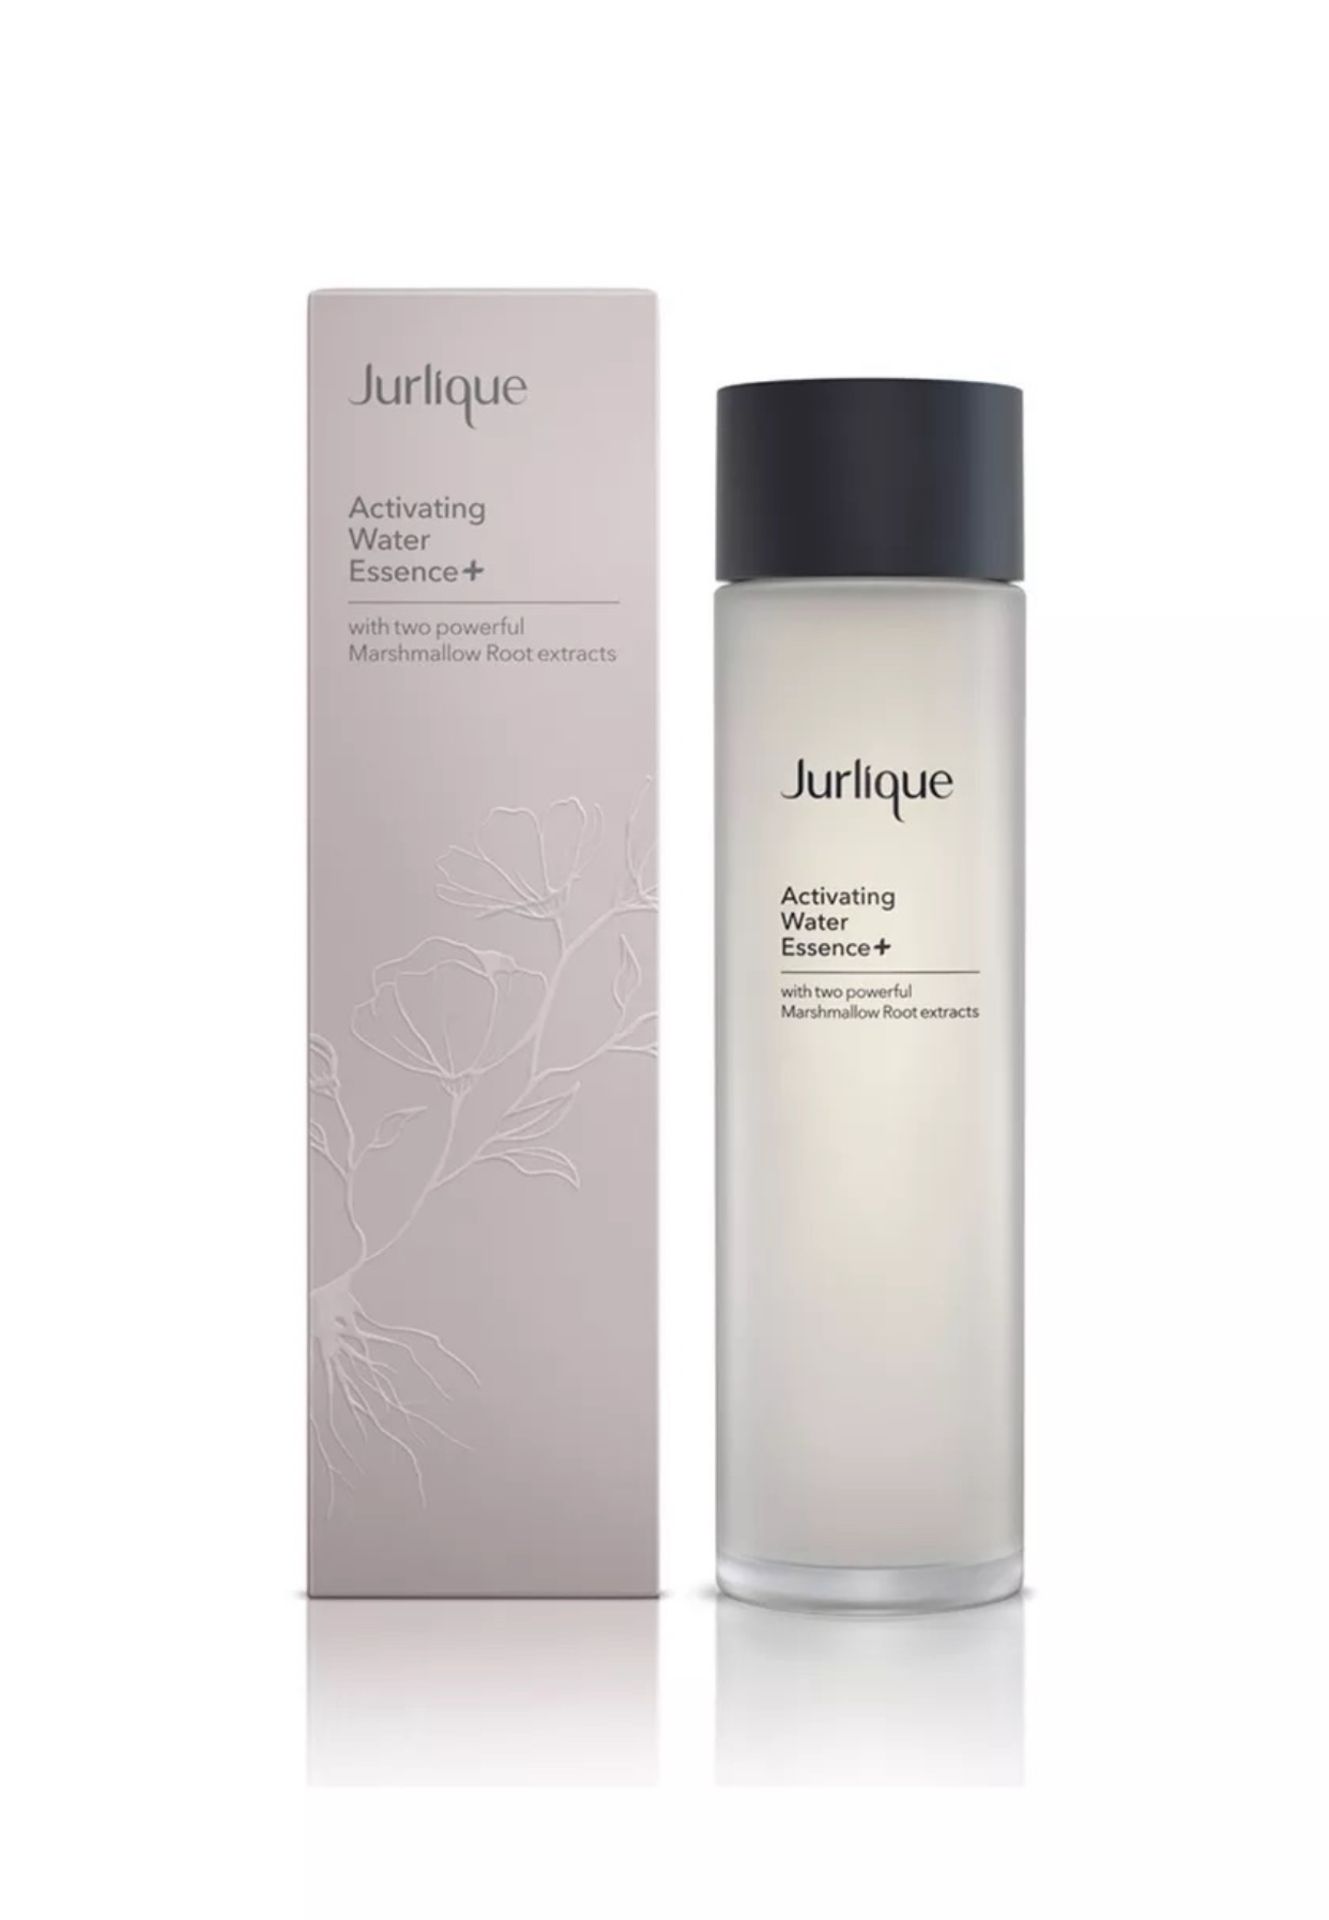 24 X 75ML JURLIQUE ACTIVATING WATER ESSENCE + CLEANSING FACIAL HYDRATE RRP£768